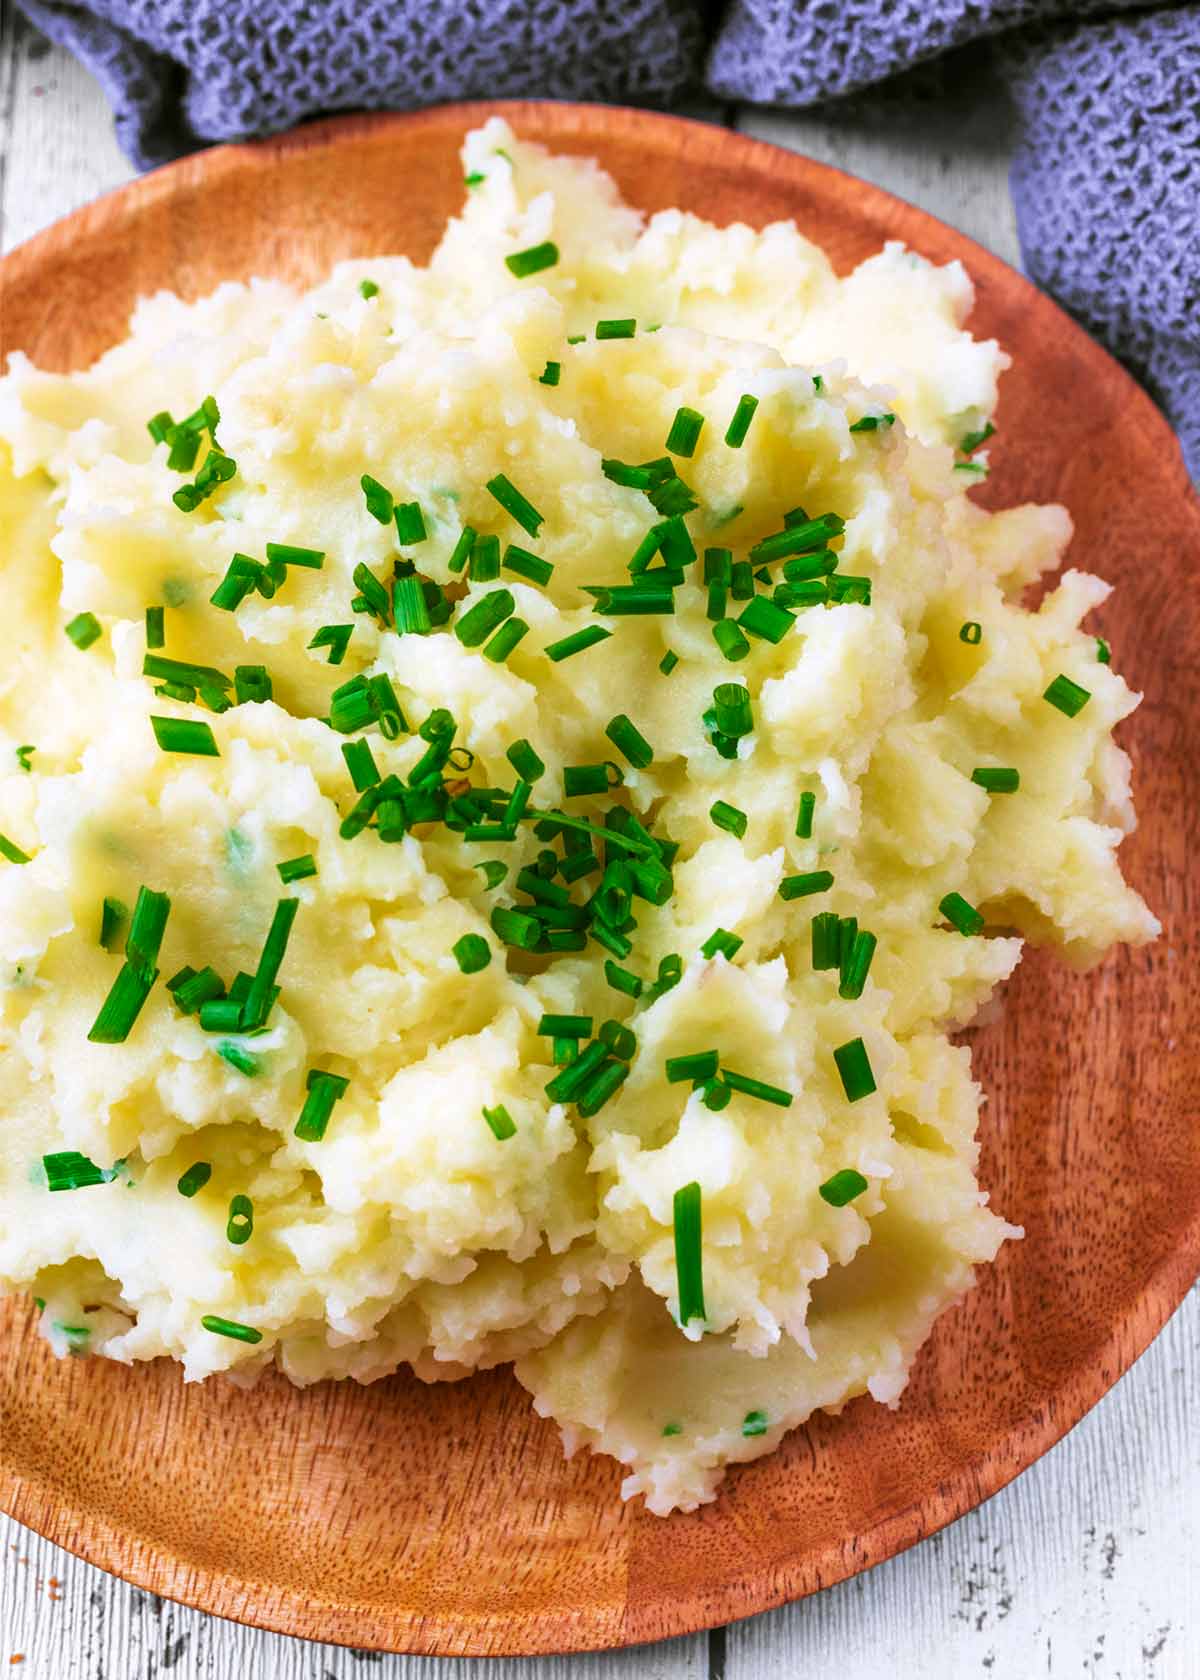 A wooden plate with a large serving of Mashed Potatoes.